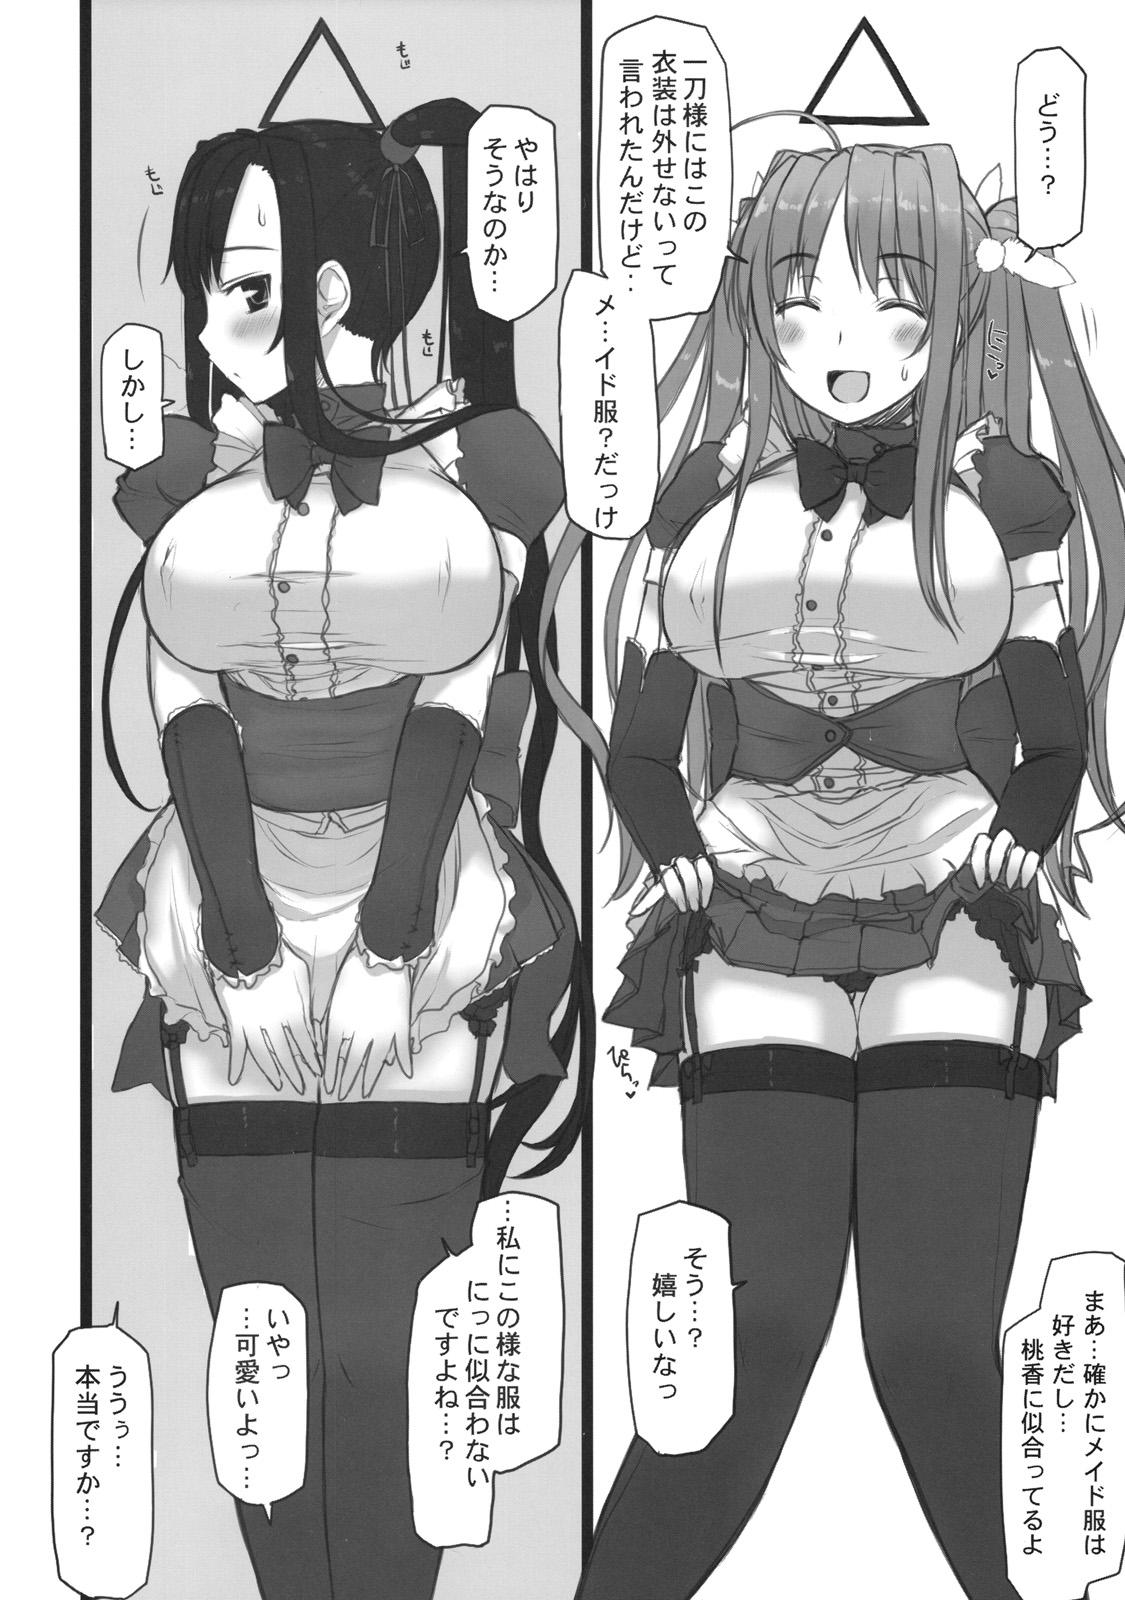 Tight Pussy Chichihime Musou - Koihime musou Bj - Page 11